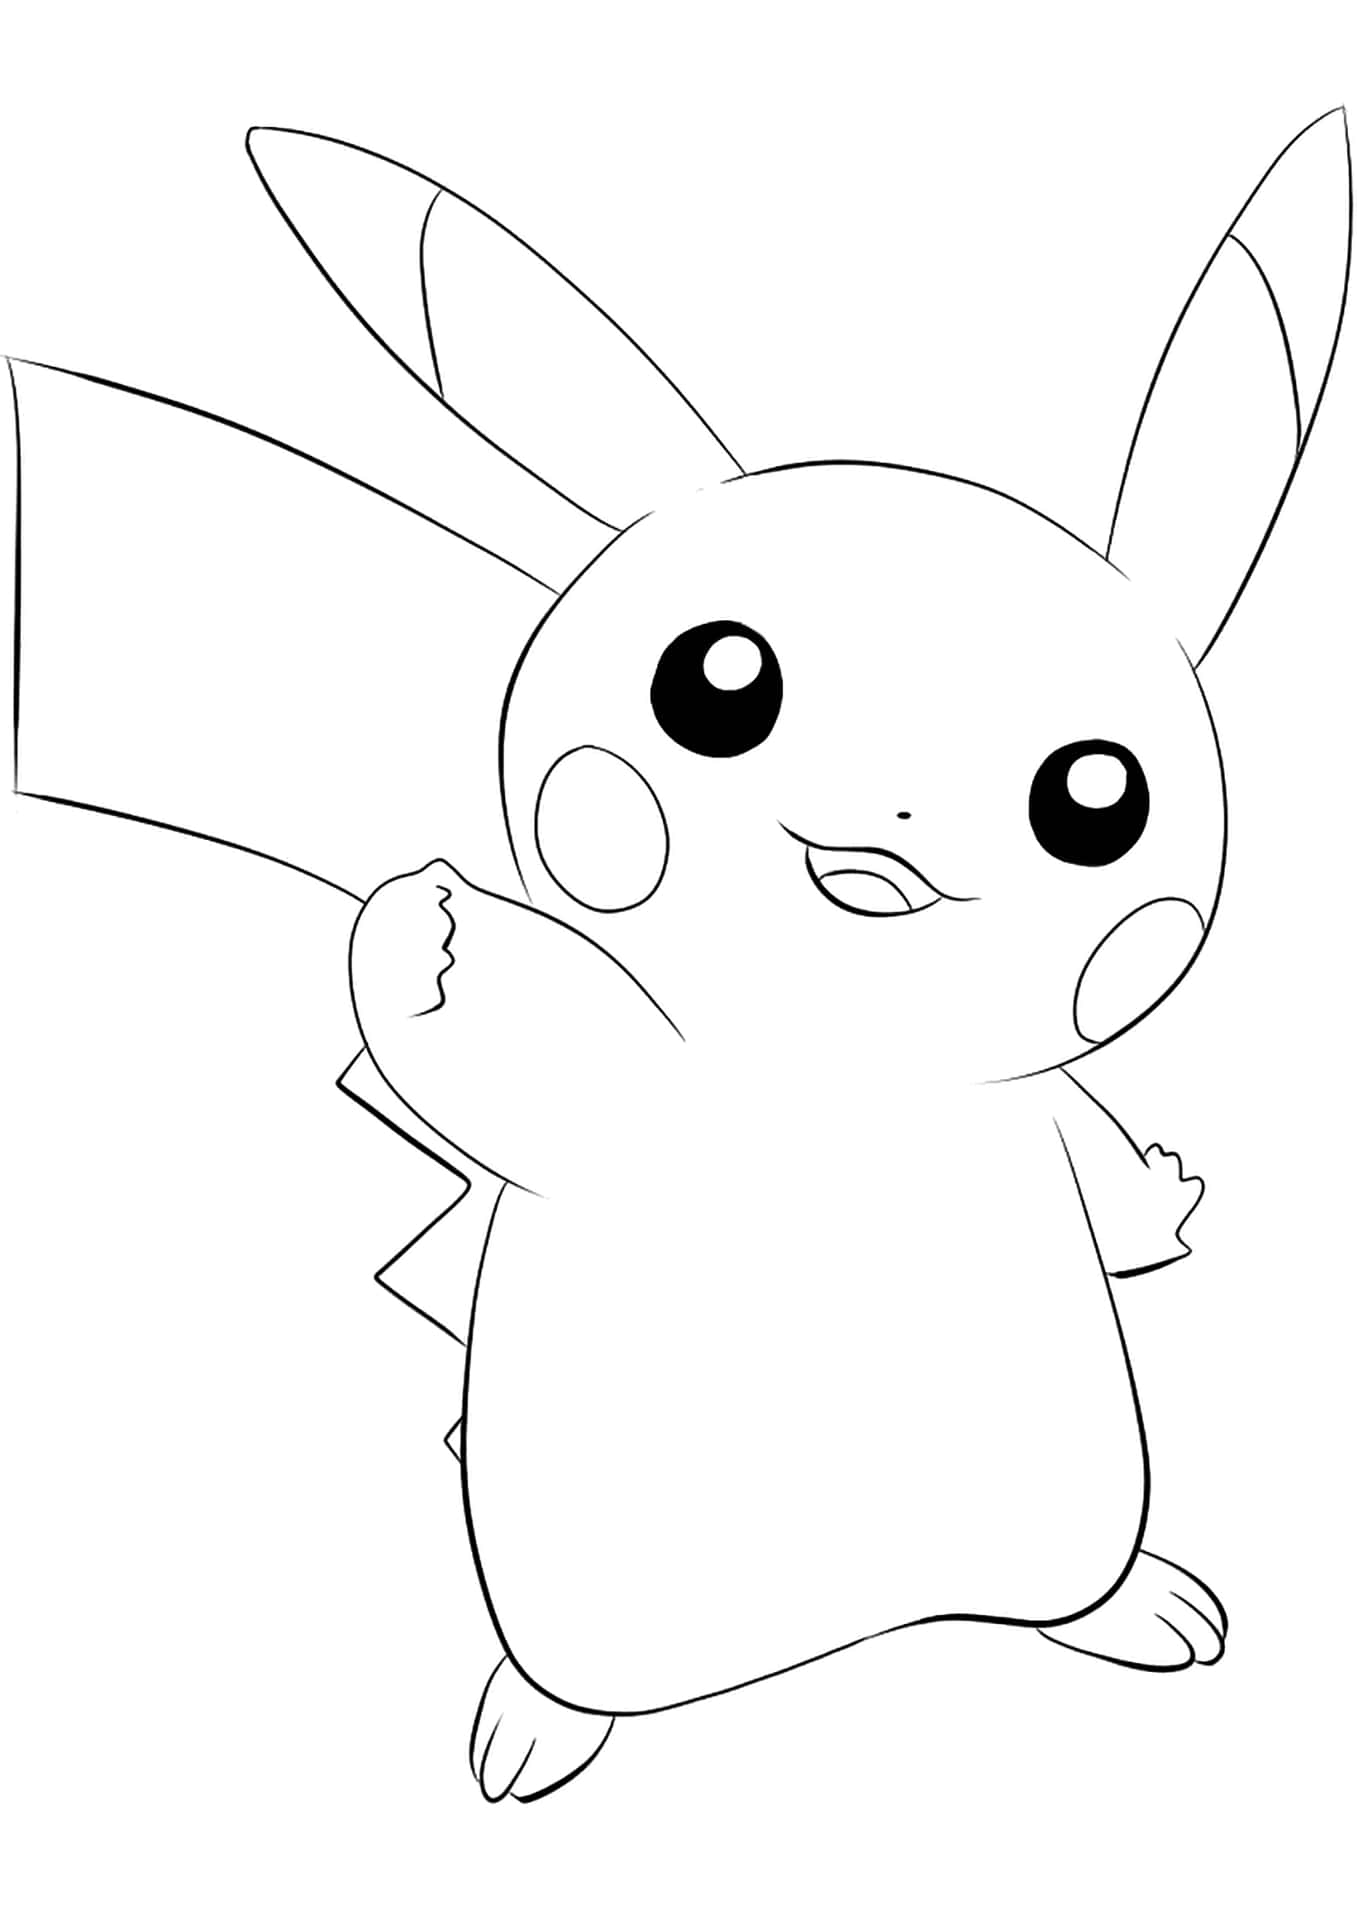 "Get creative and bring your favorite Pokemon to life with this printable Pokemon coloring page"